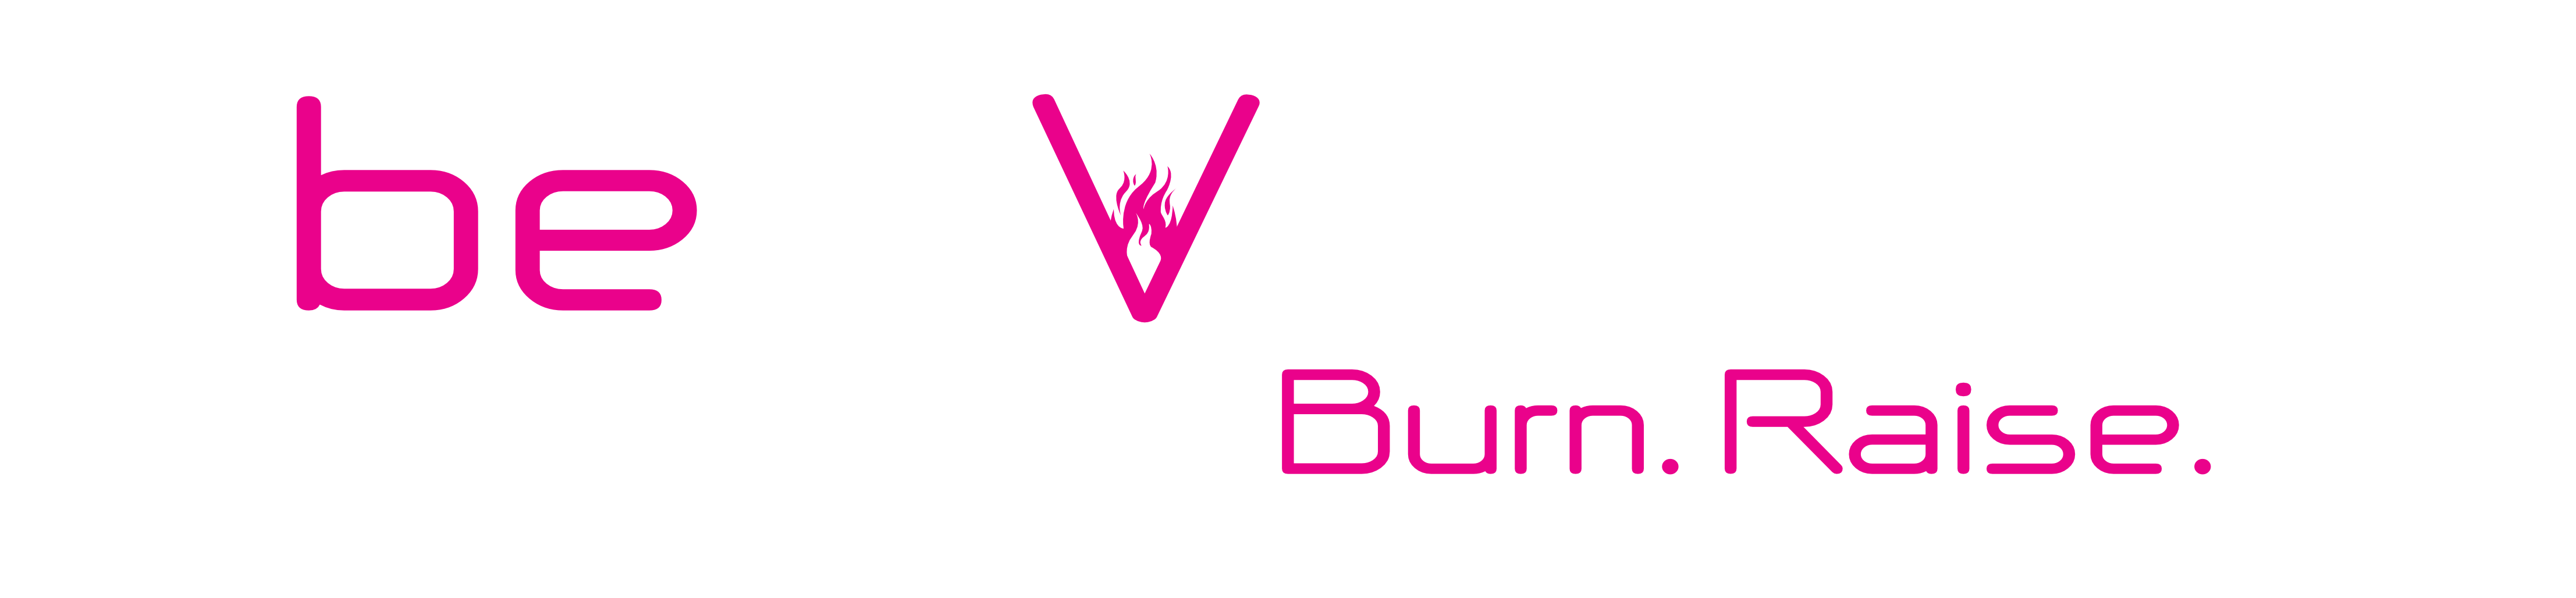 Divina logo. Text: be Divina with pink accent color. The emblem is a V with a flame in the middle. The claim is: Burn. Raise. 